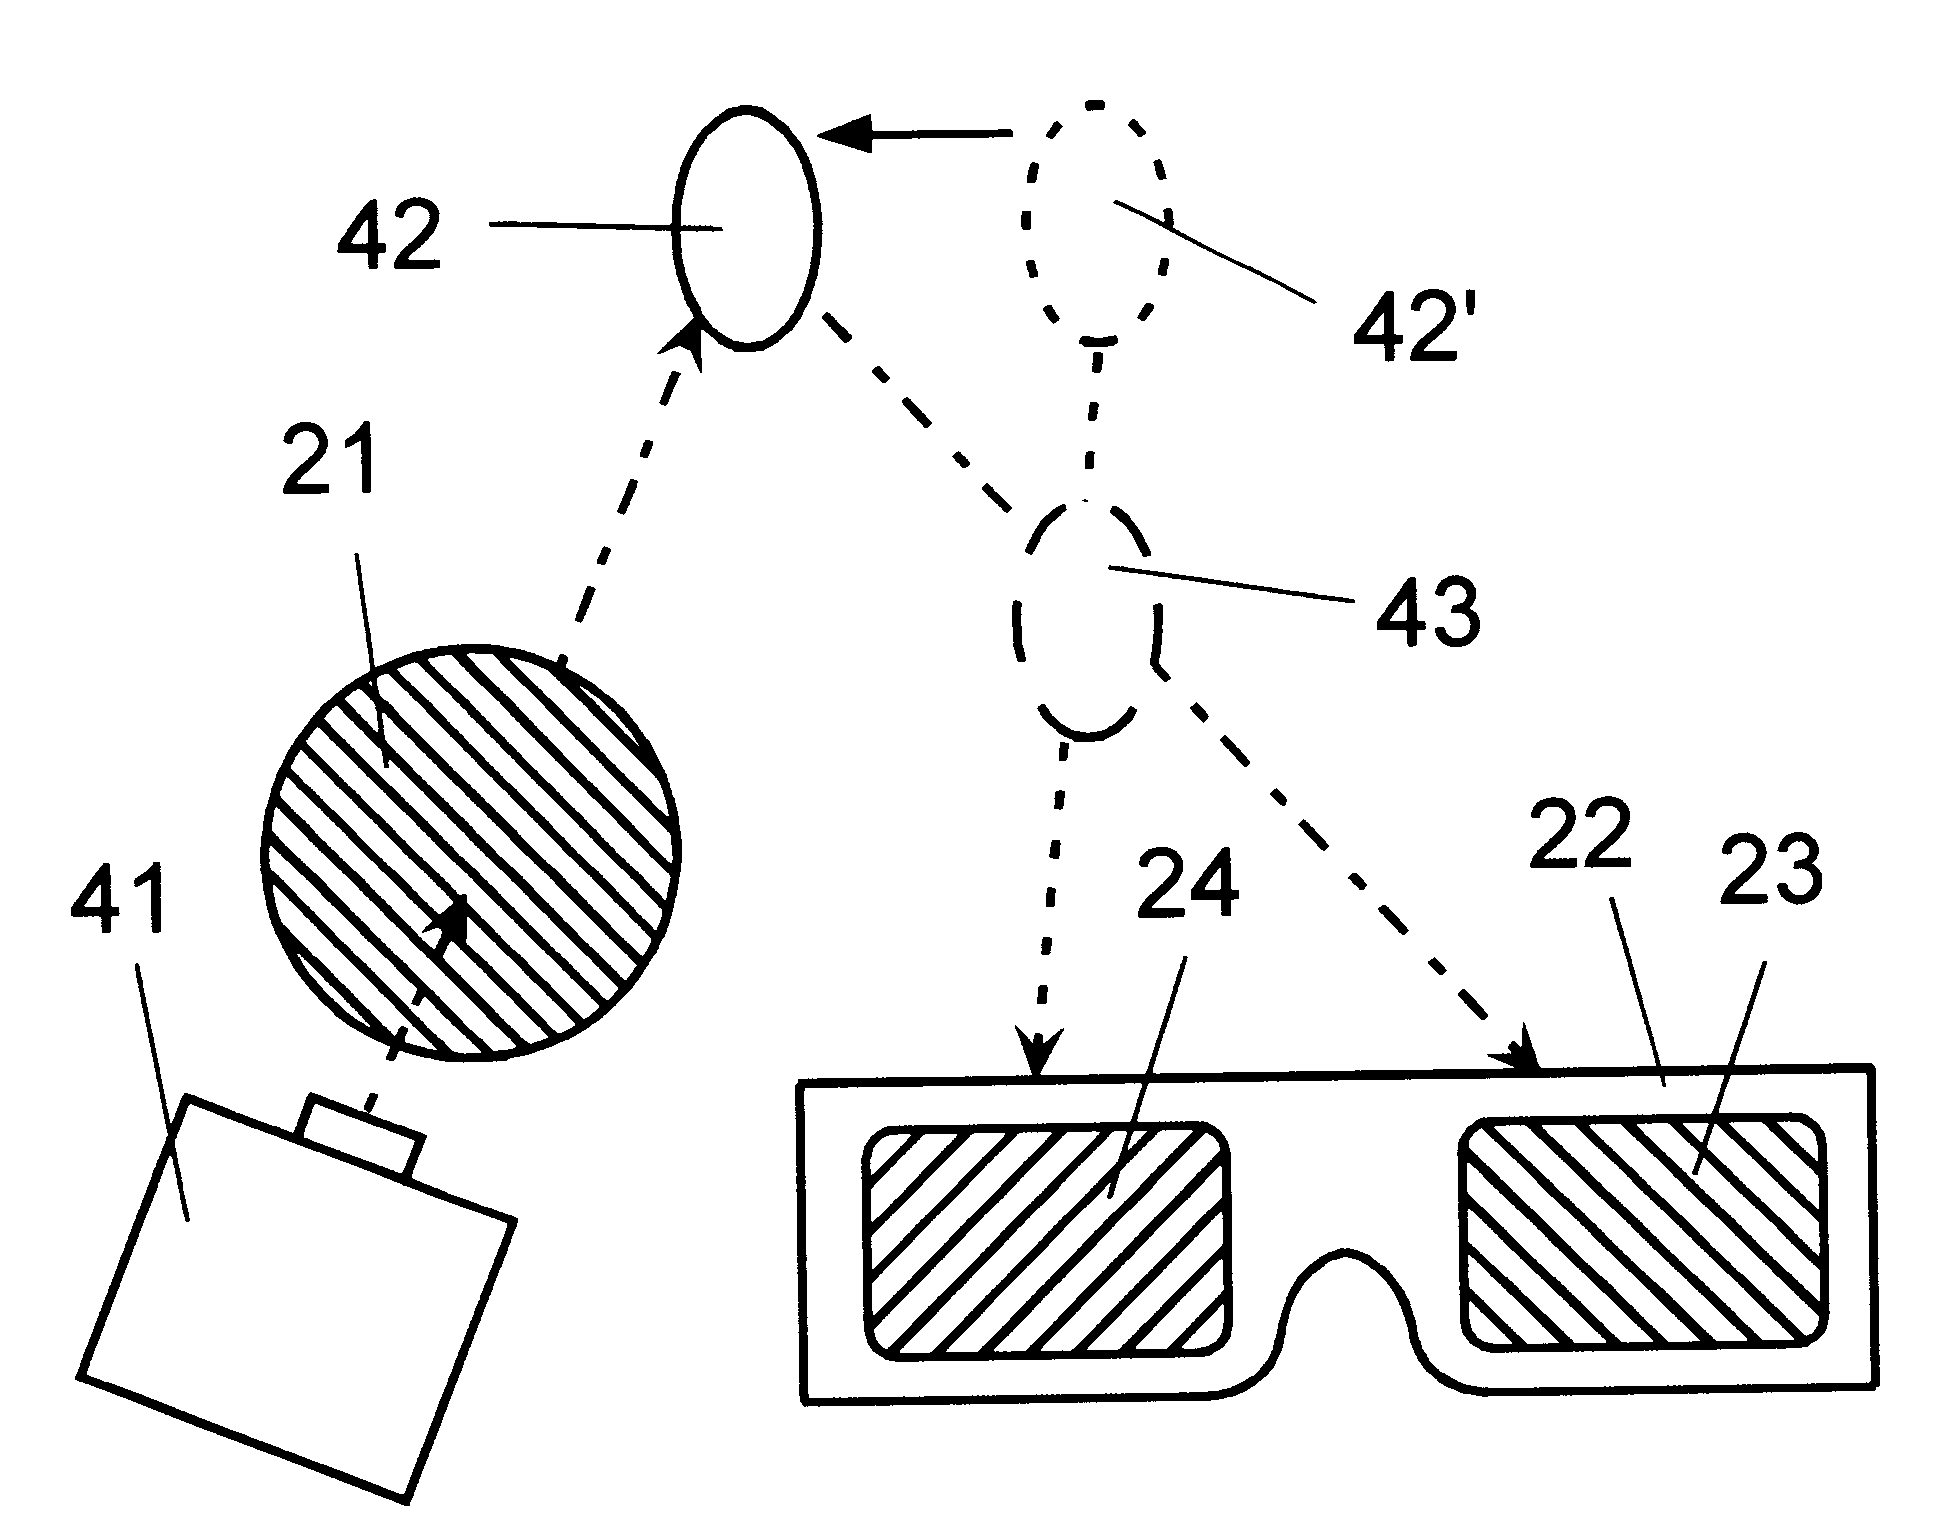 Polarizing system for motion visual depth effects